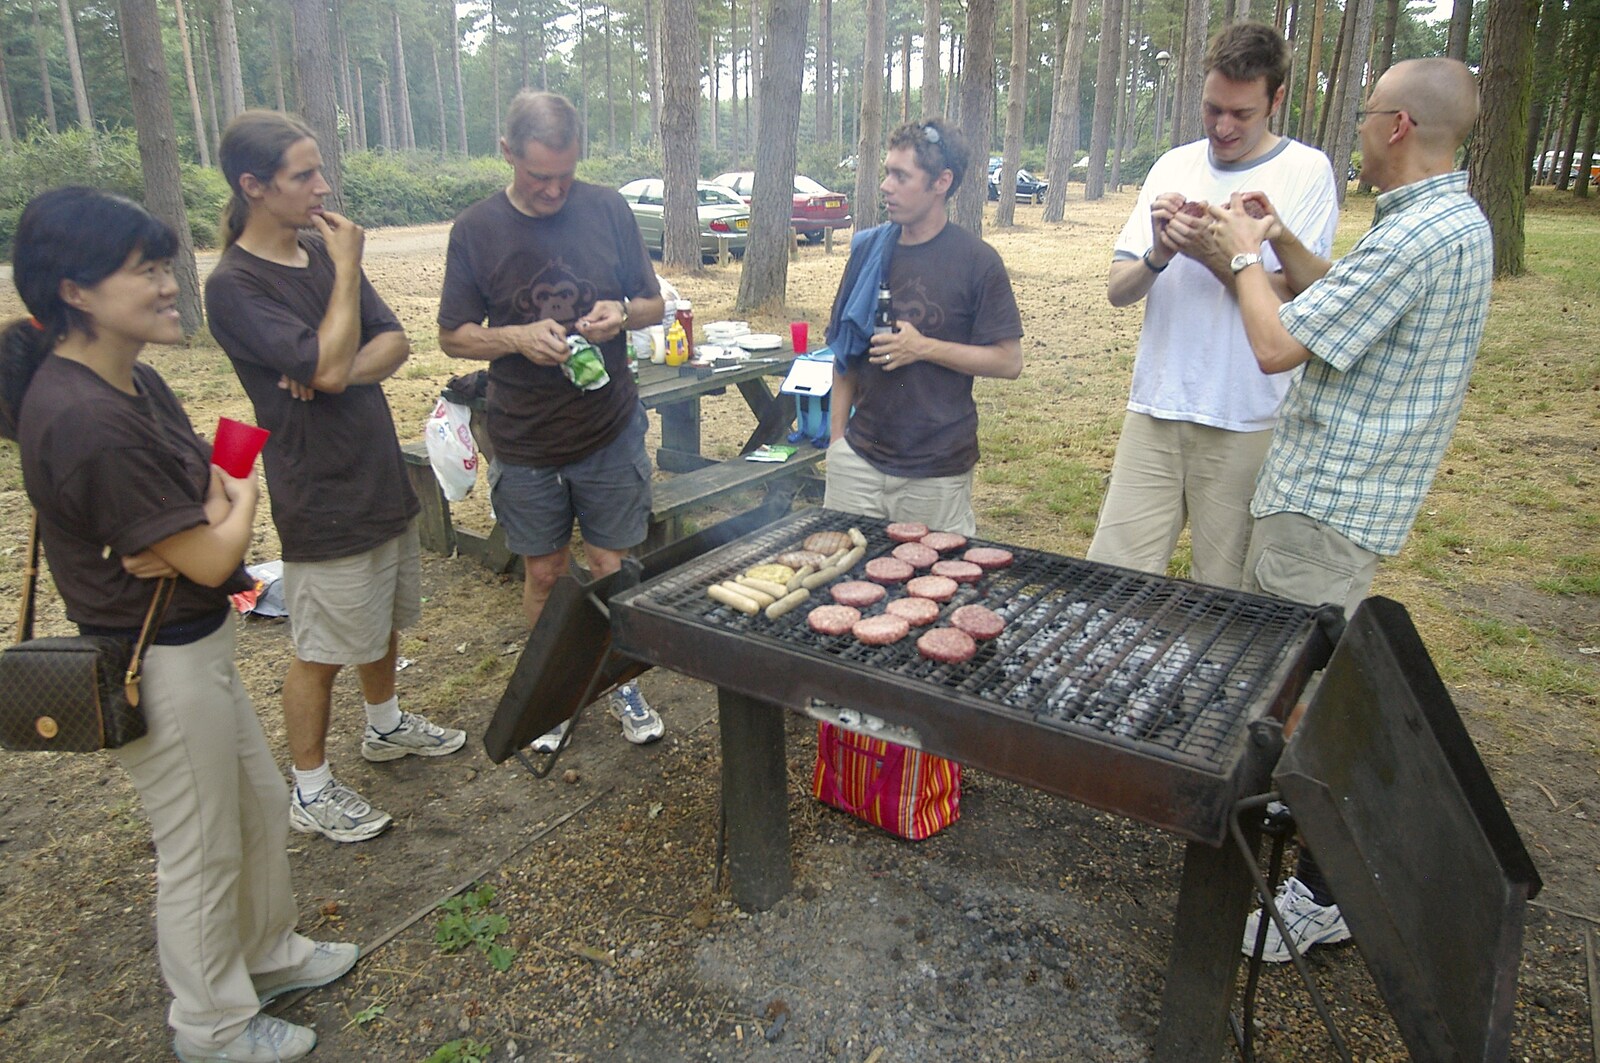 Barbequed burgers from Qualcomm Cambridge "Go Ape", High Lodge, Thetford Forest - 27th July 2006